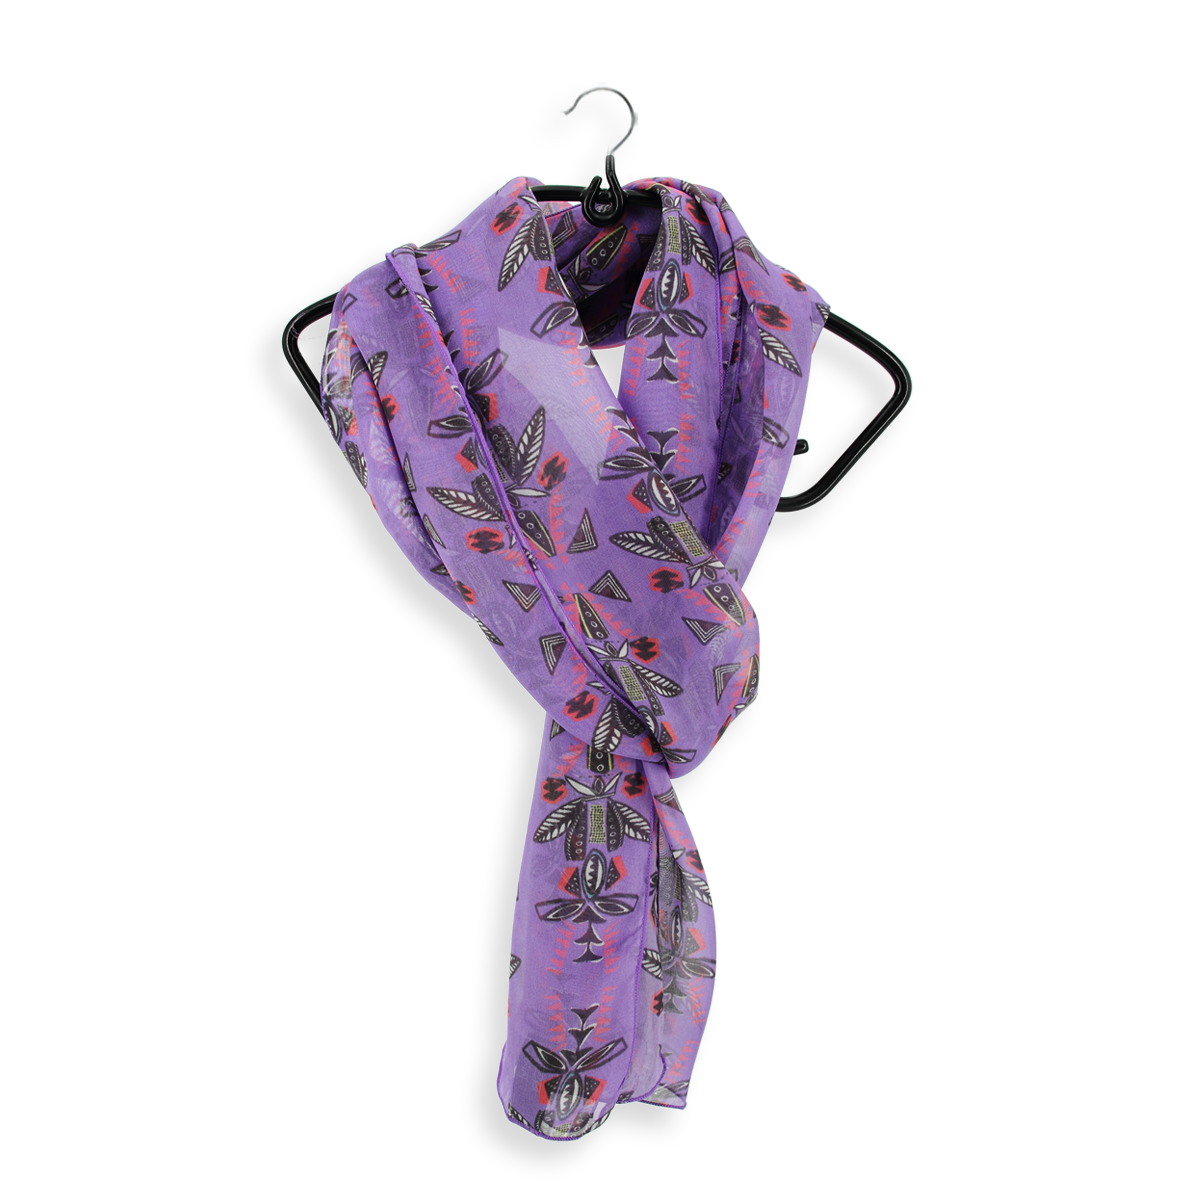 Timeless women?s 100% silk printed scarf | French chic and elegance